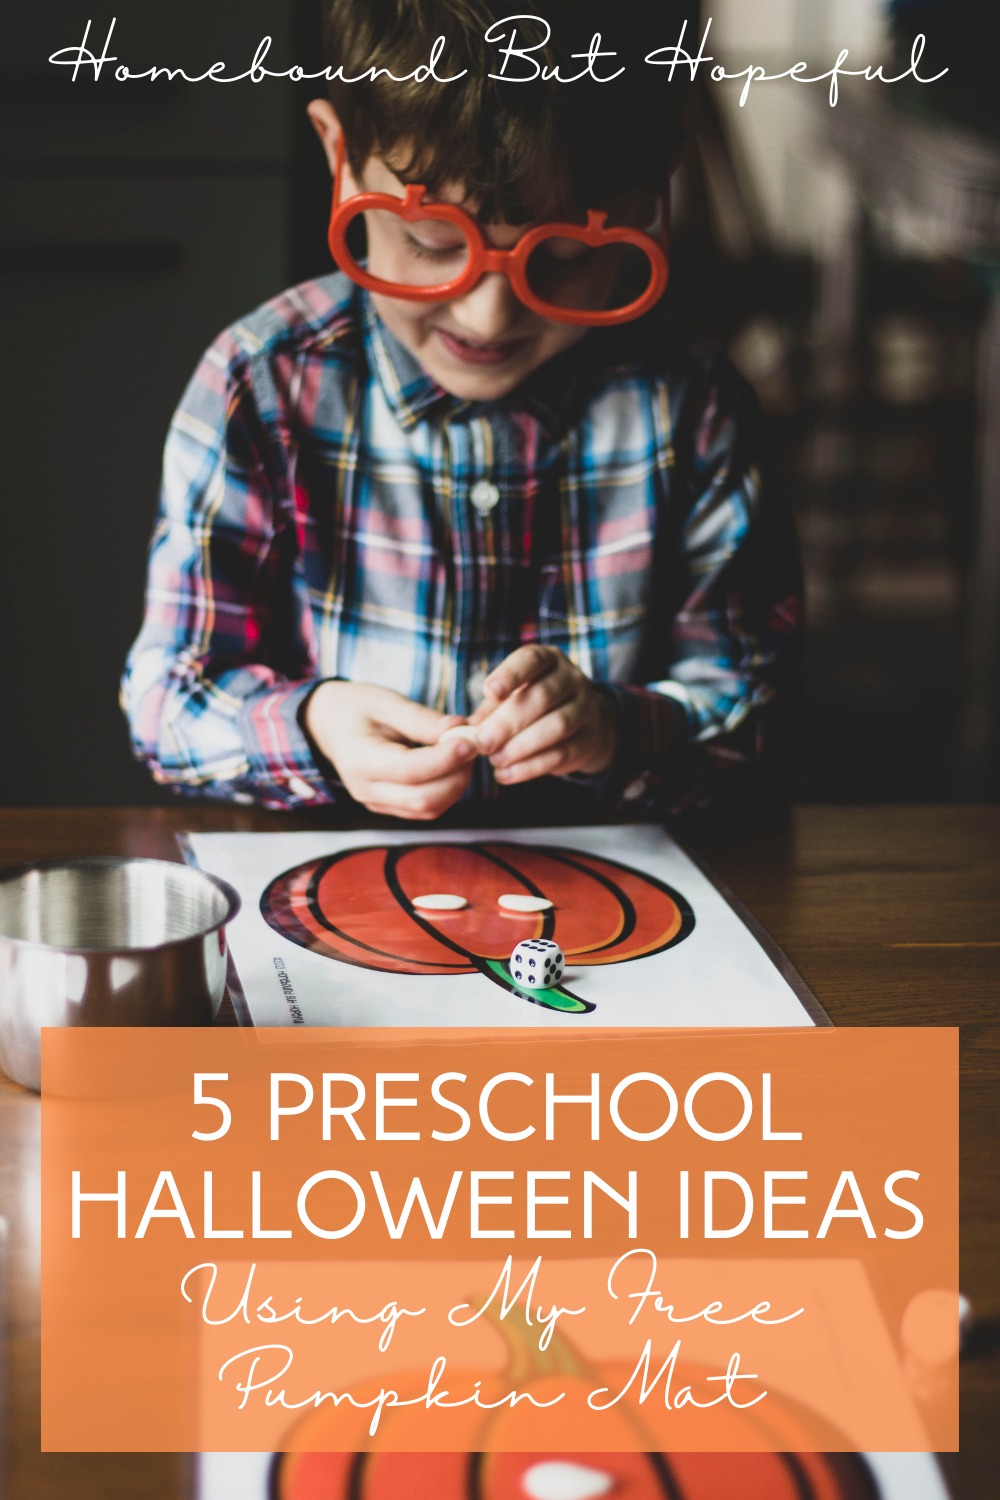 Looking for some festive, fun, AND educational ideas for spooky season? I've got you covered with these 5 Halloween preschool ideas!